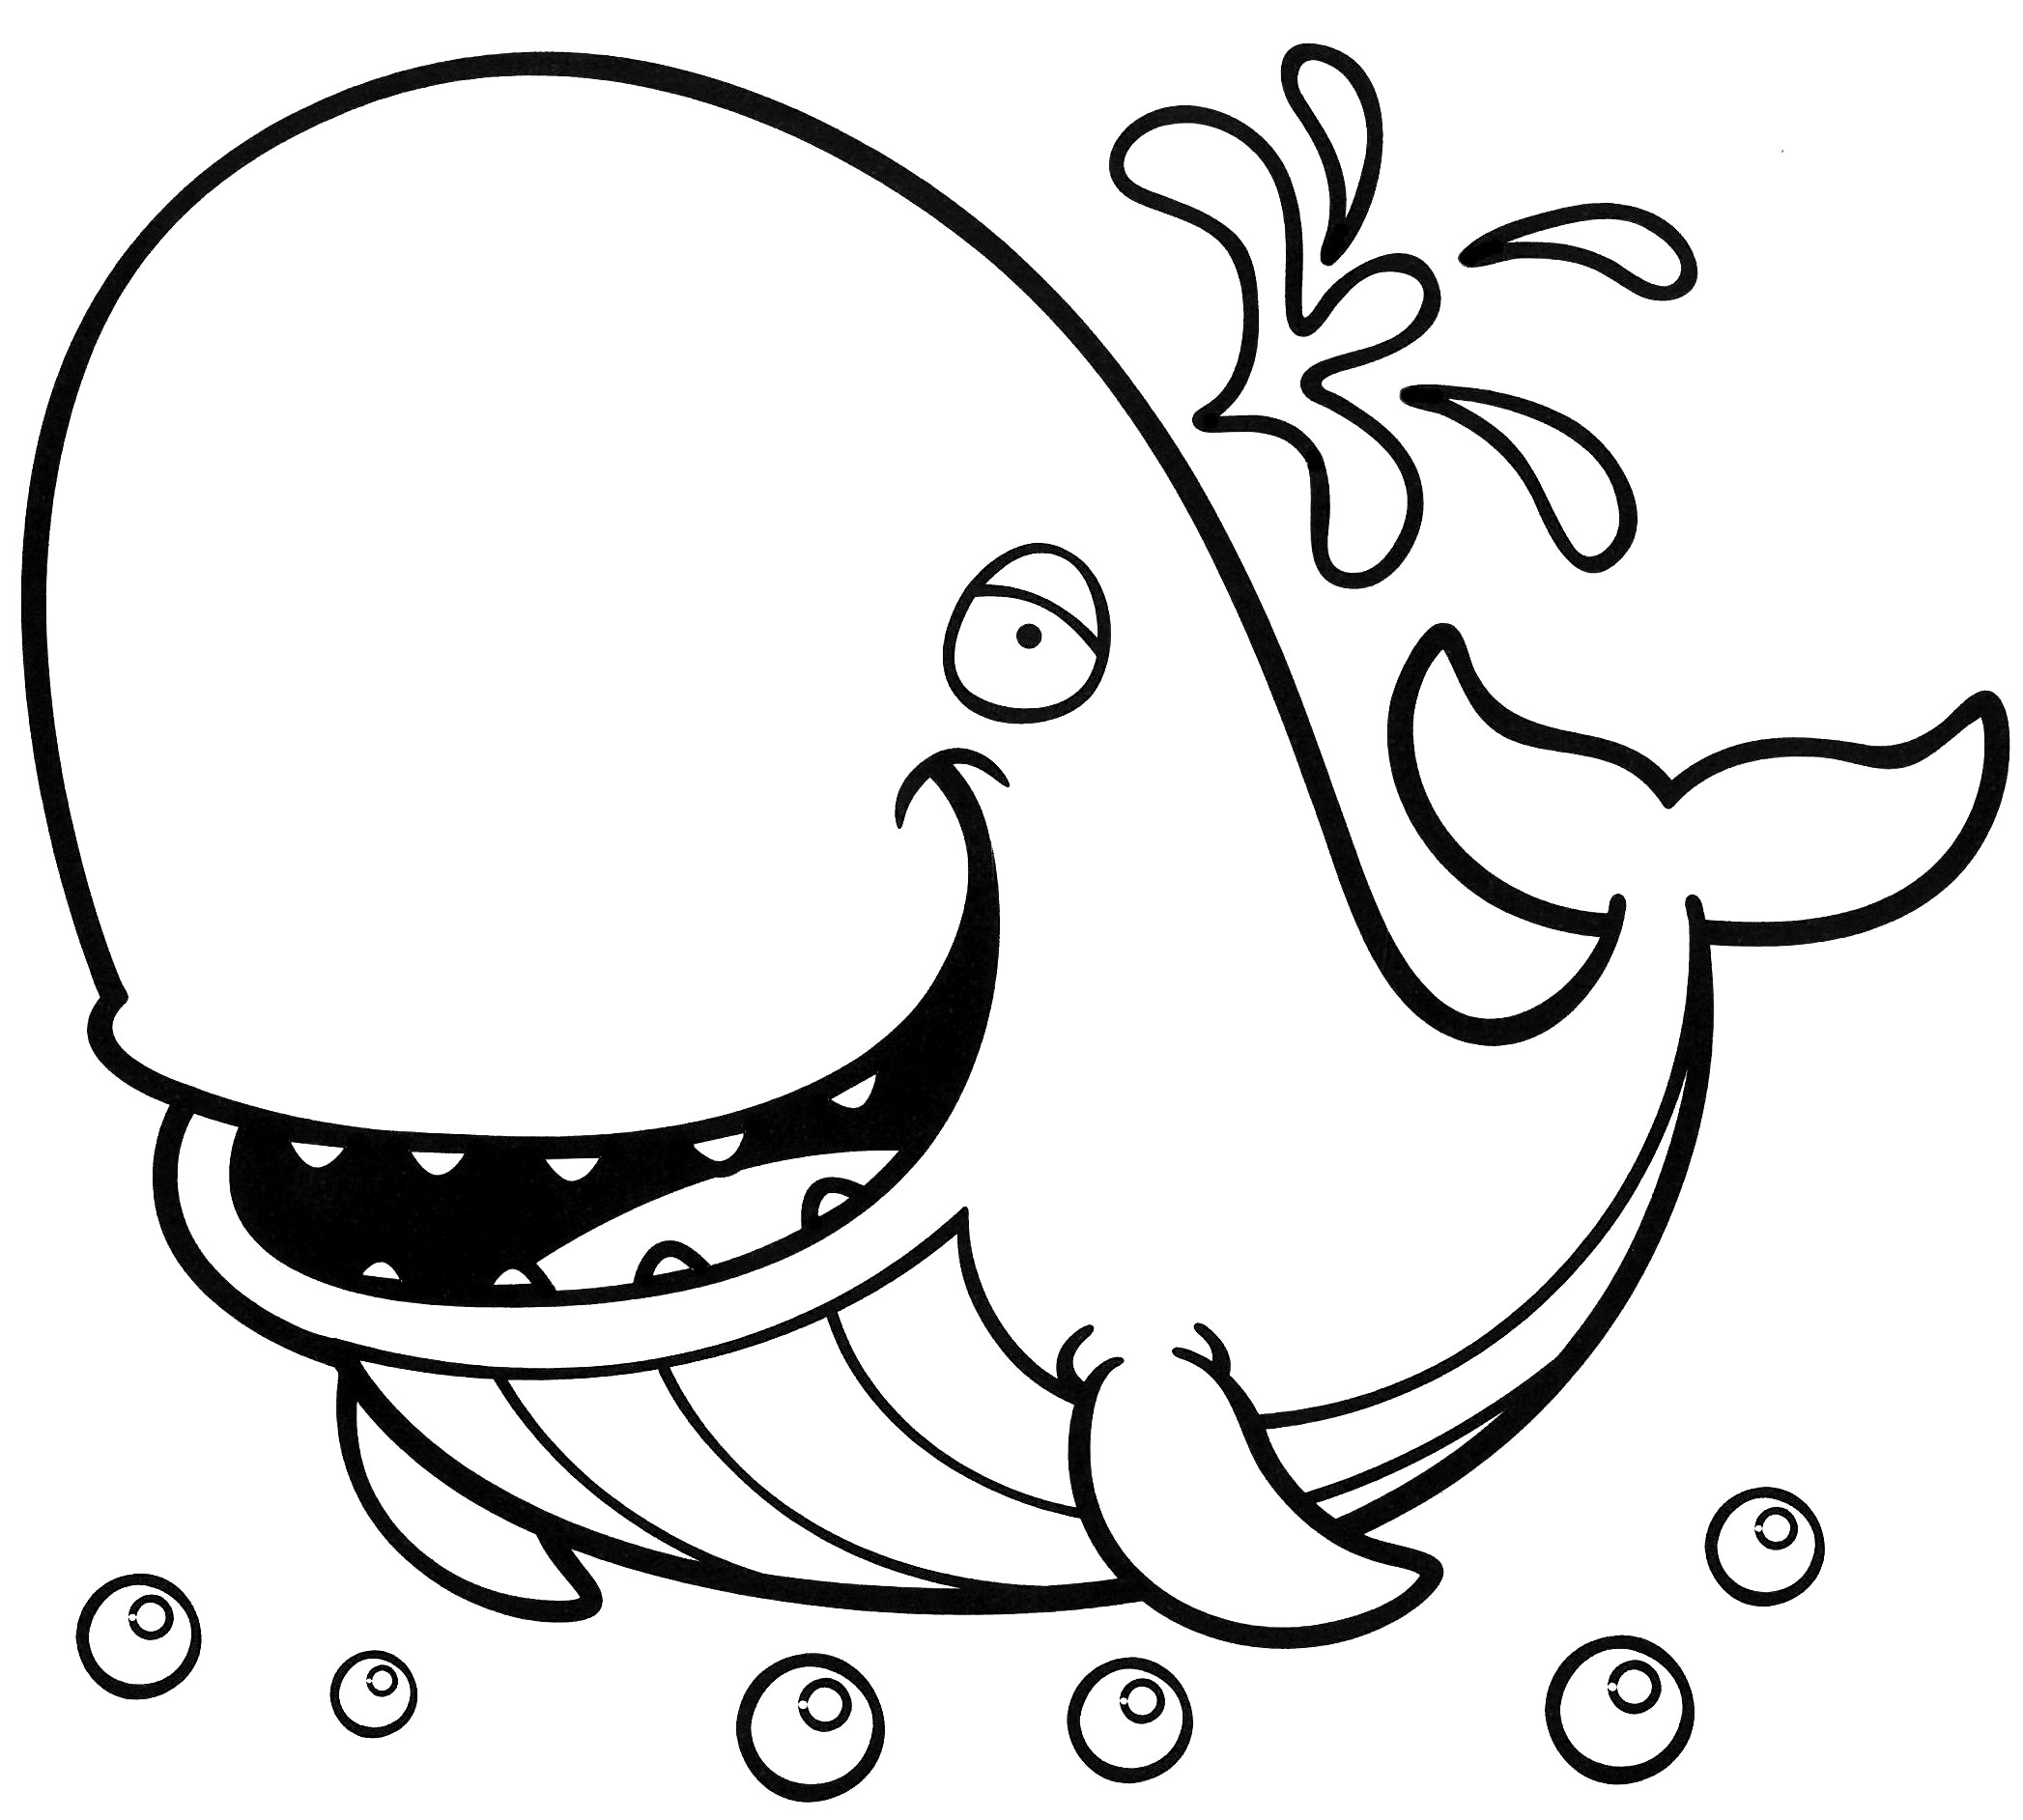 Jolly whale coloring page - free and printable